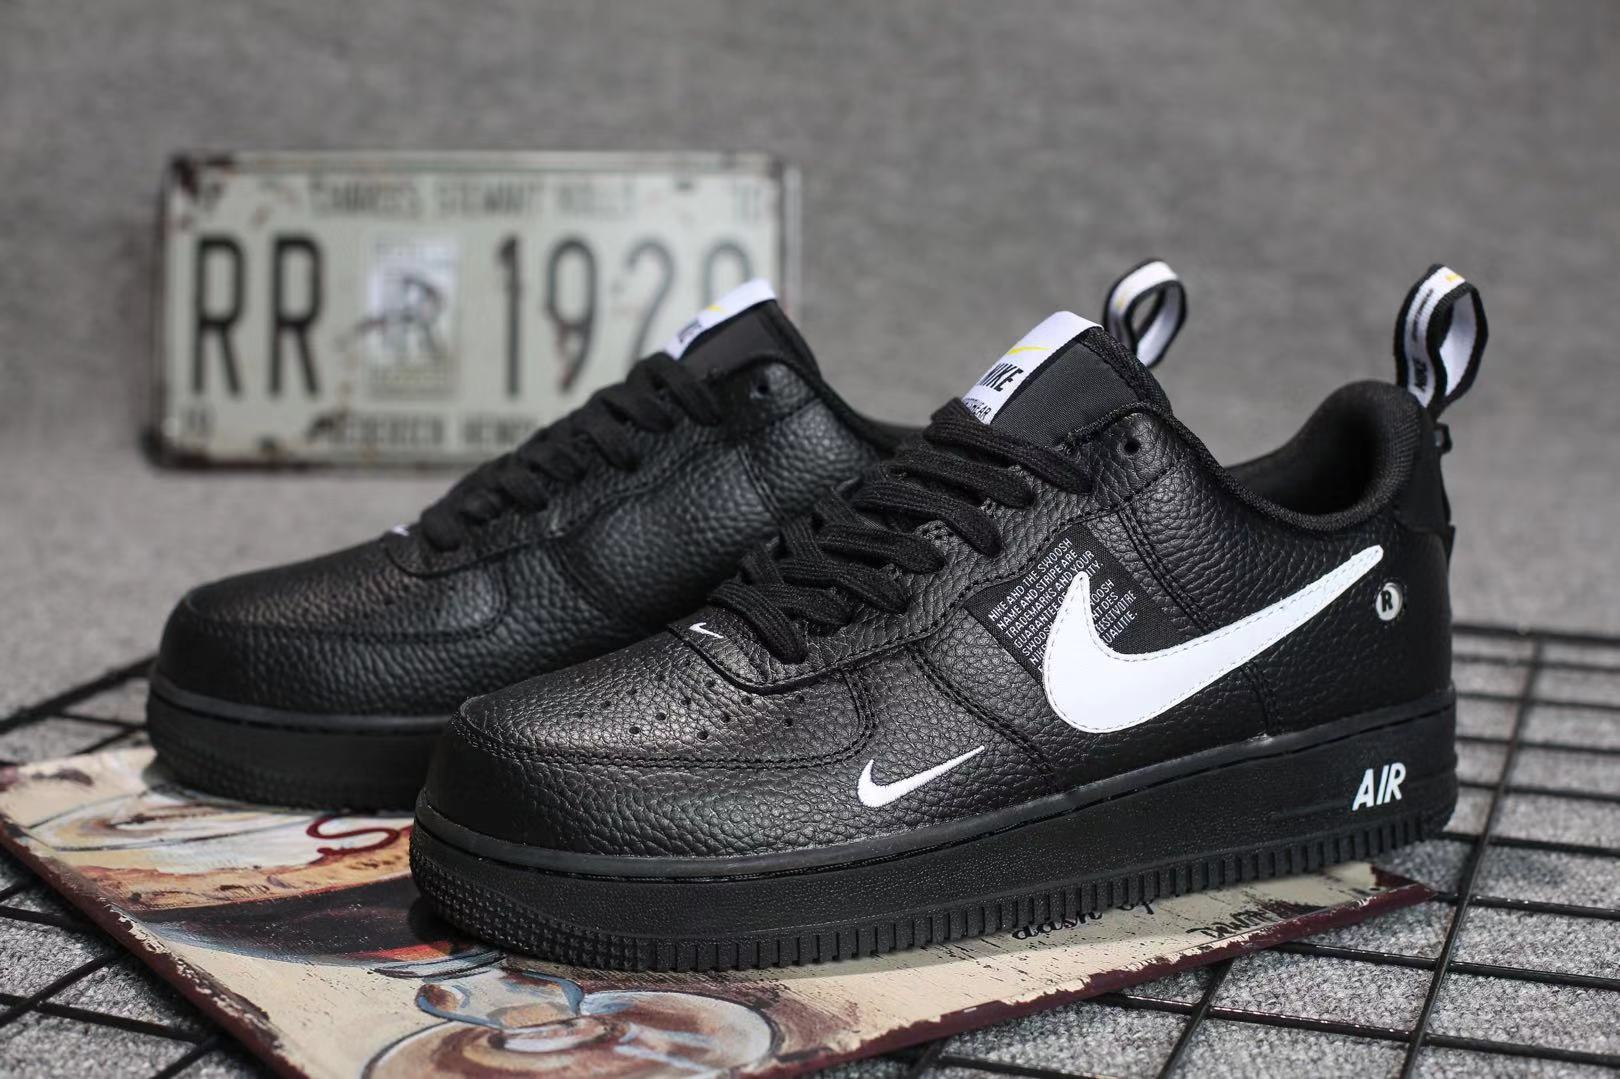 2019 Nike Air Force 1 '07 LV8 Utility Black White Shoes For Women